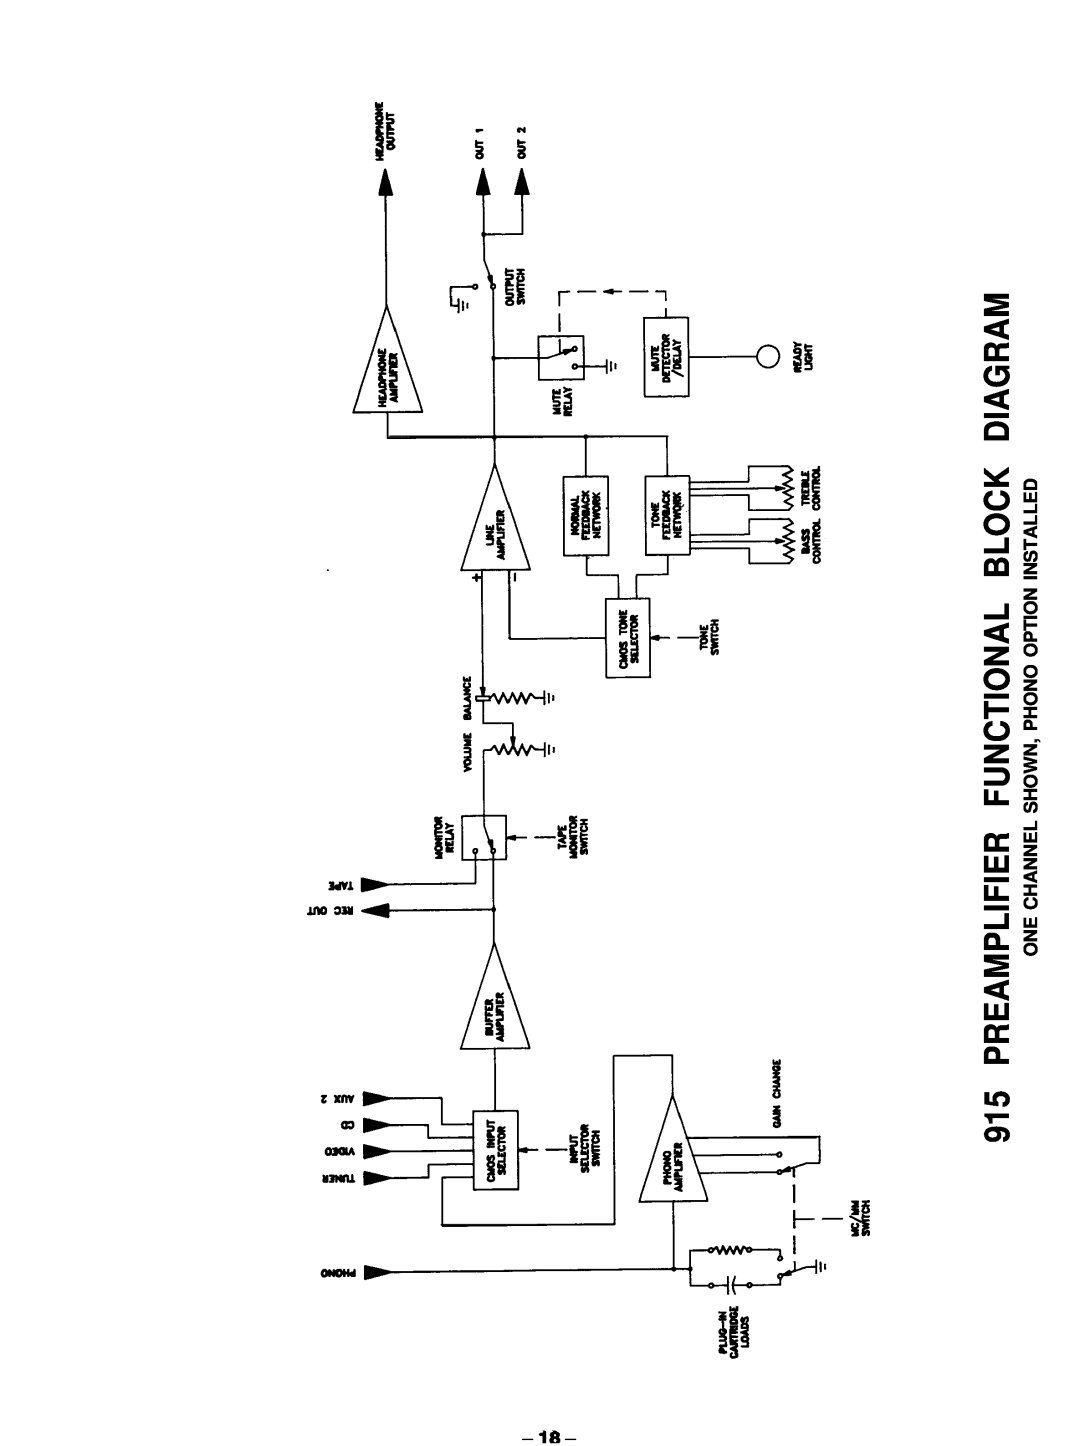 Hafler 0915P manual Preamplifier Functional Block Diagram, One Channel Shown, Phono Option Installed, I t 